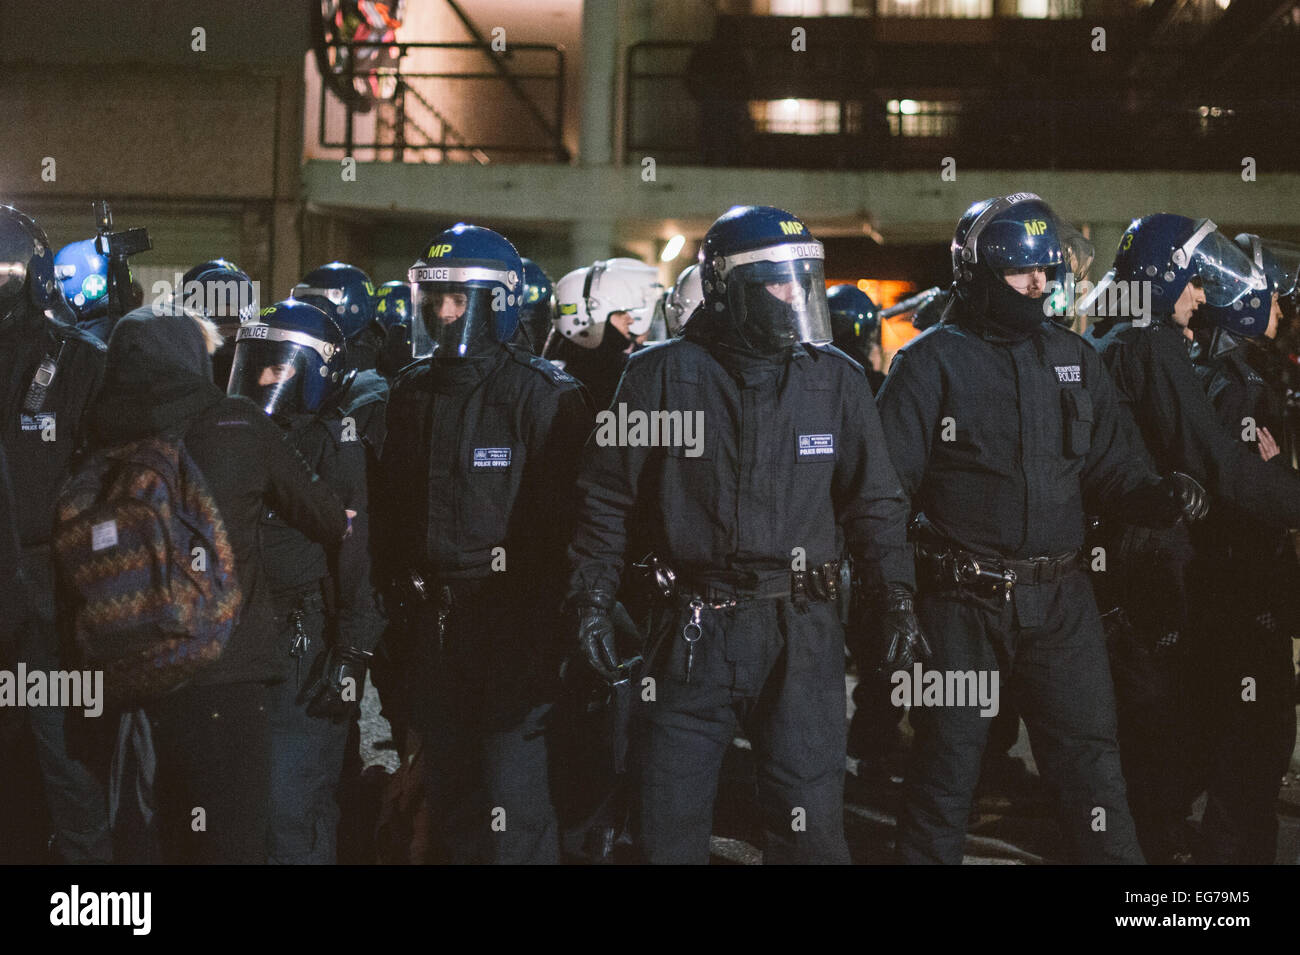 London, UK. 17th February, 2015. The eviction at Aylesbury Estate, 77 – 105 Chartridge, Westmoreland Road on 17th February 2015 of housing activists on one of europe's largest Estates.  Protesters gathered as police in riot gear cut down barricades and make arrests. Credit: Richard Skinner/Alamy Live News Stock Photo